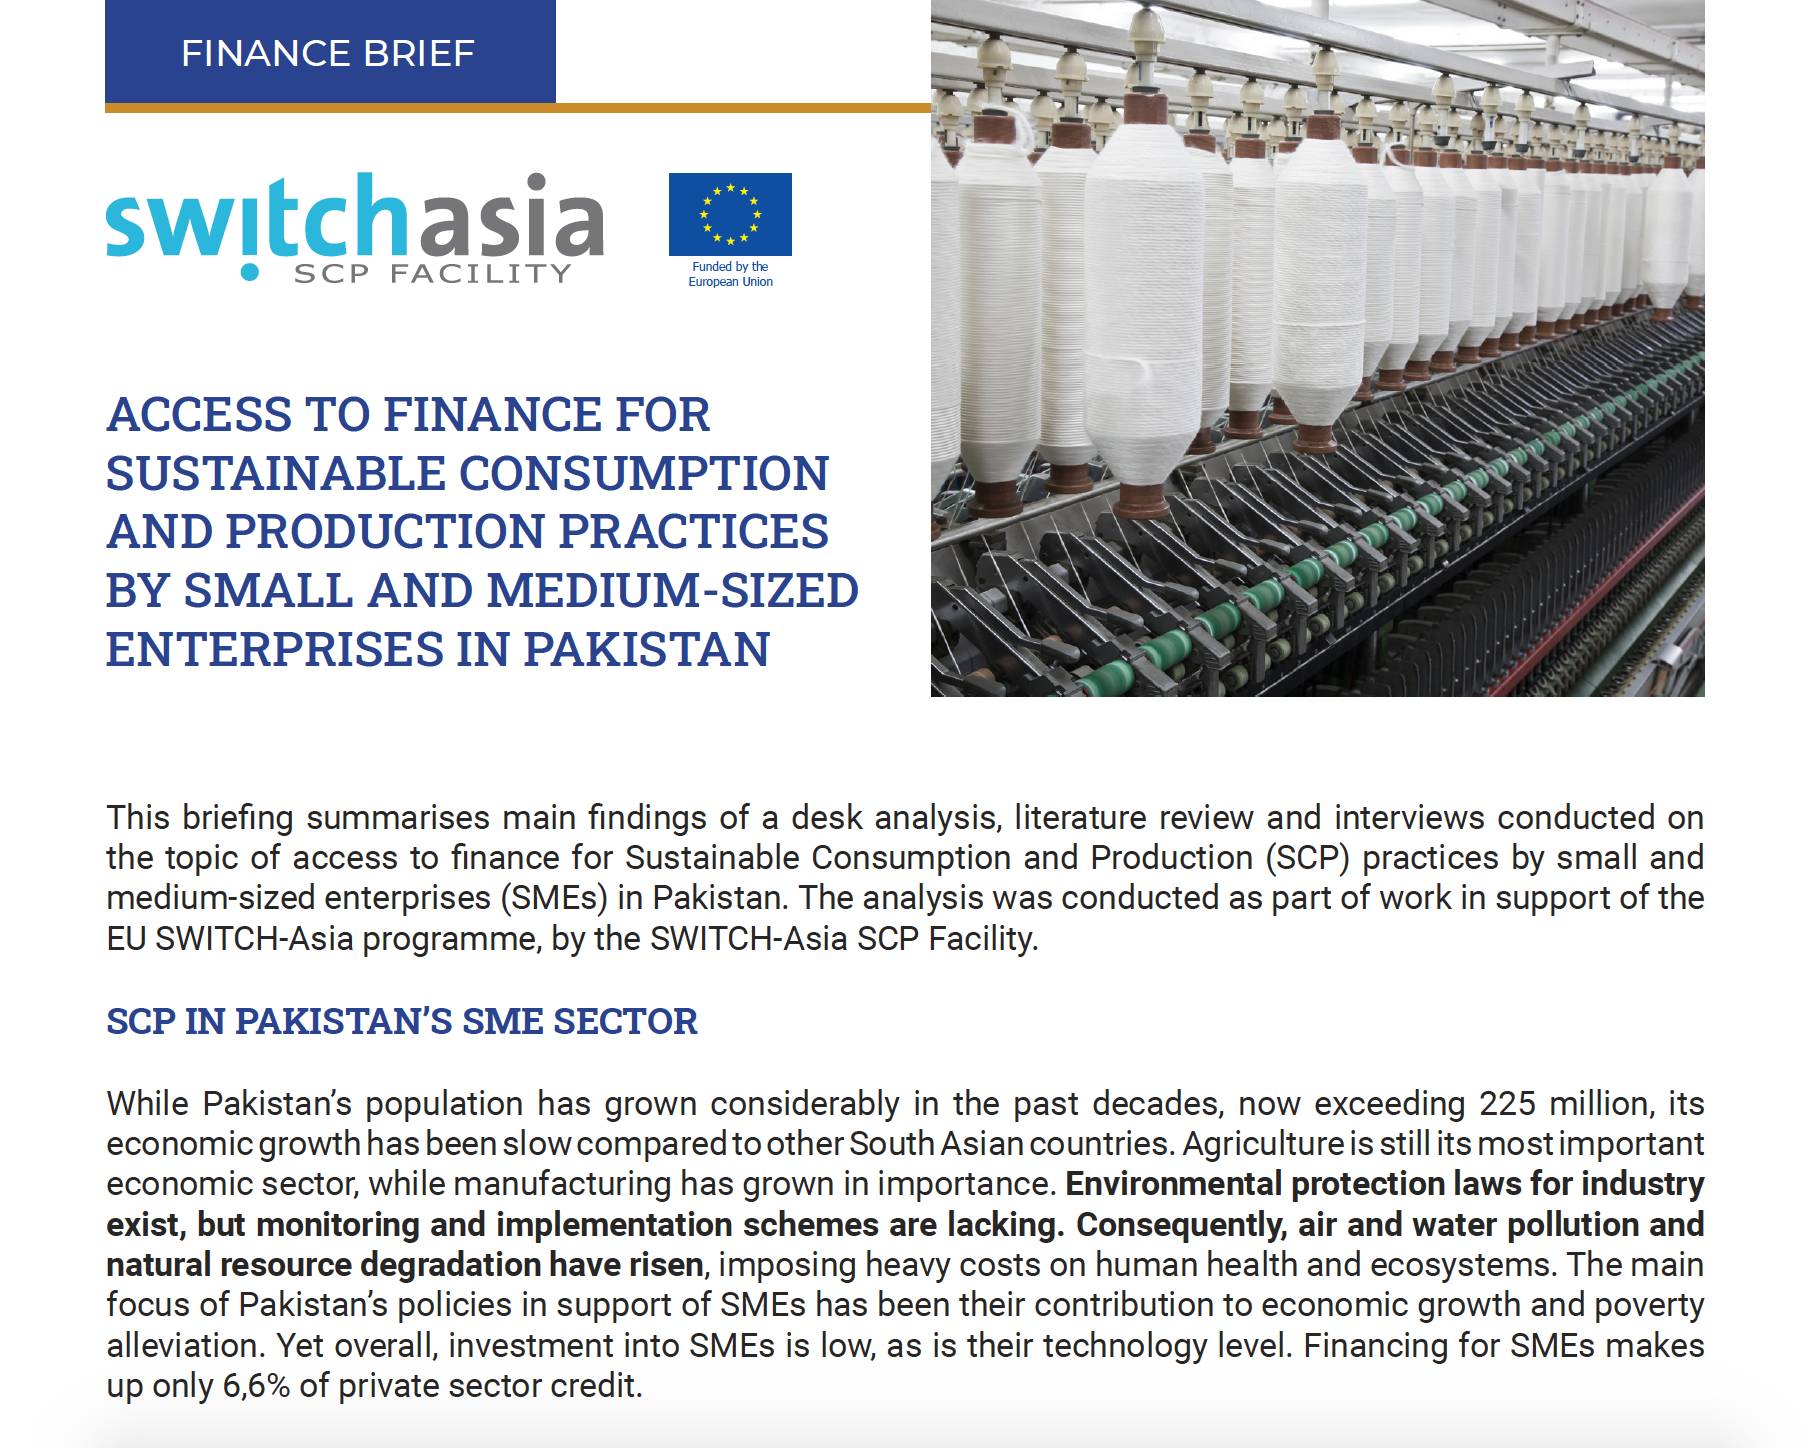 Access to Finance for SCP Practices by Small and Medium-sized Enterprises in Pakistan